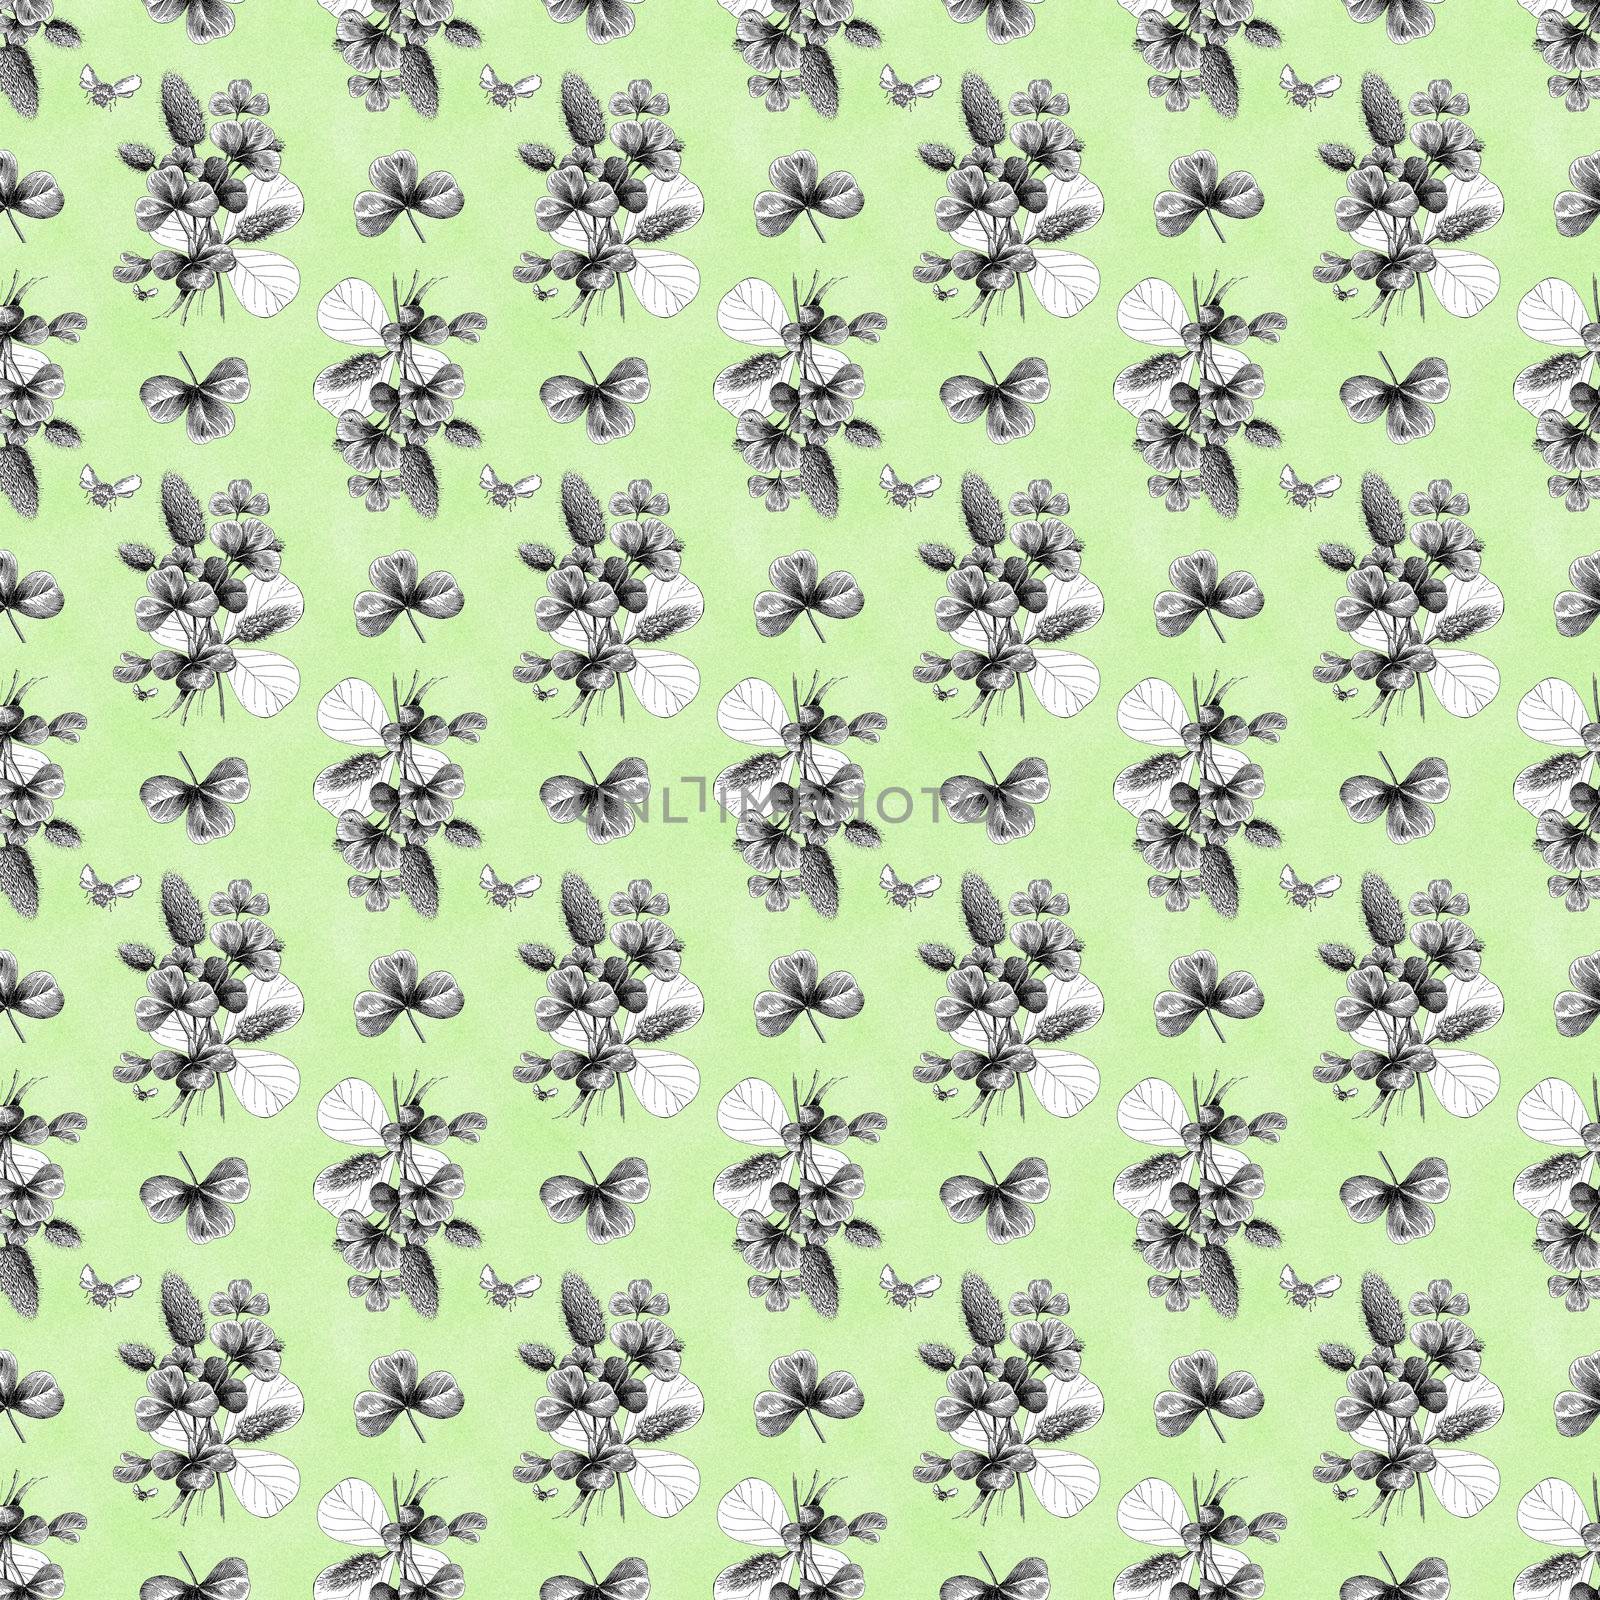 Seamless clusters of black and white clover blossoms and leaves with bees on pastel green